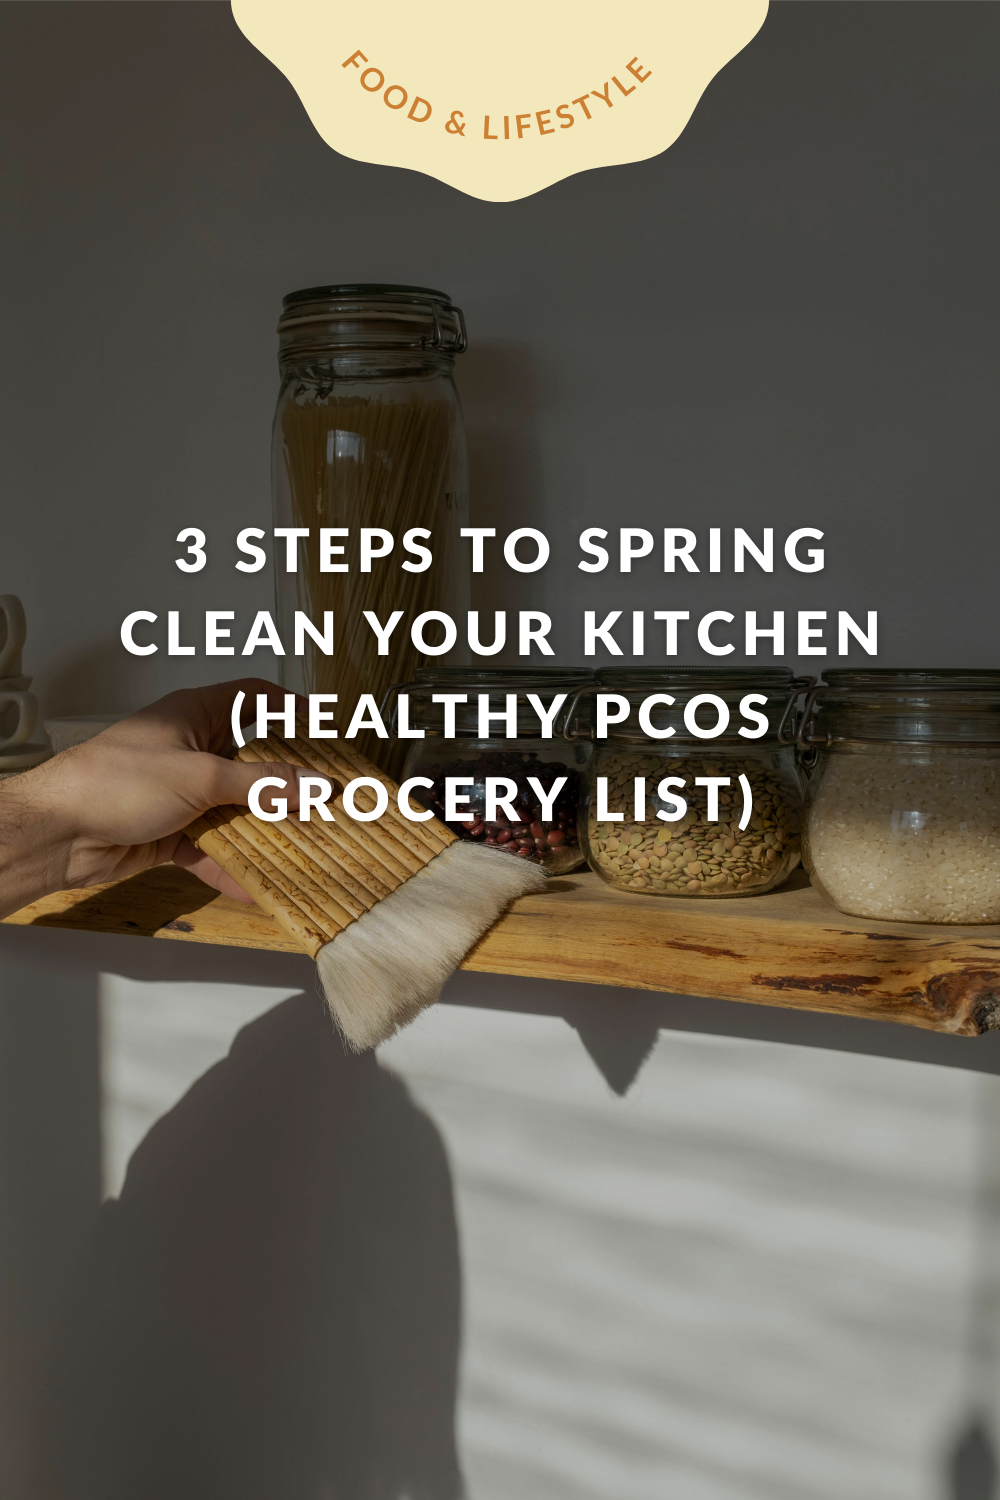 3 Steps to Spring Clean your Kitchen (+ Healthy PCOS Grocery List)